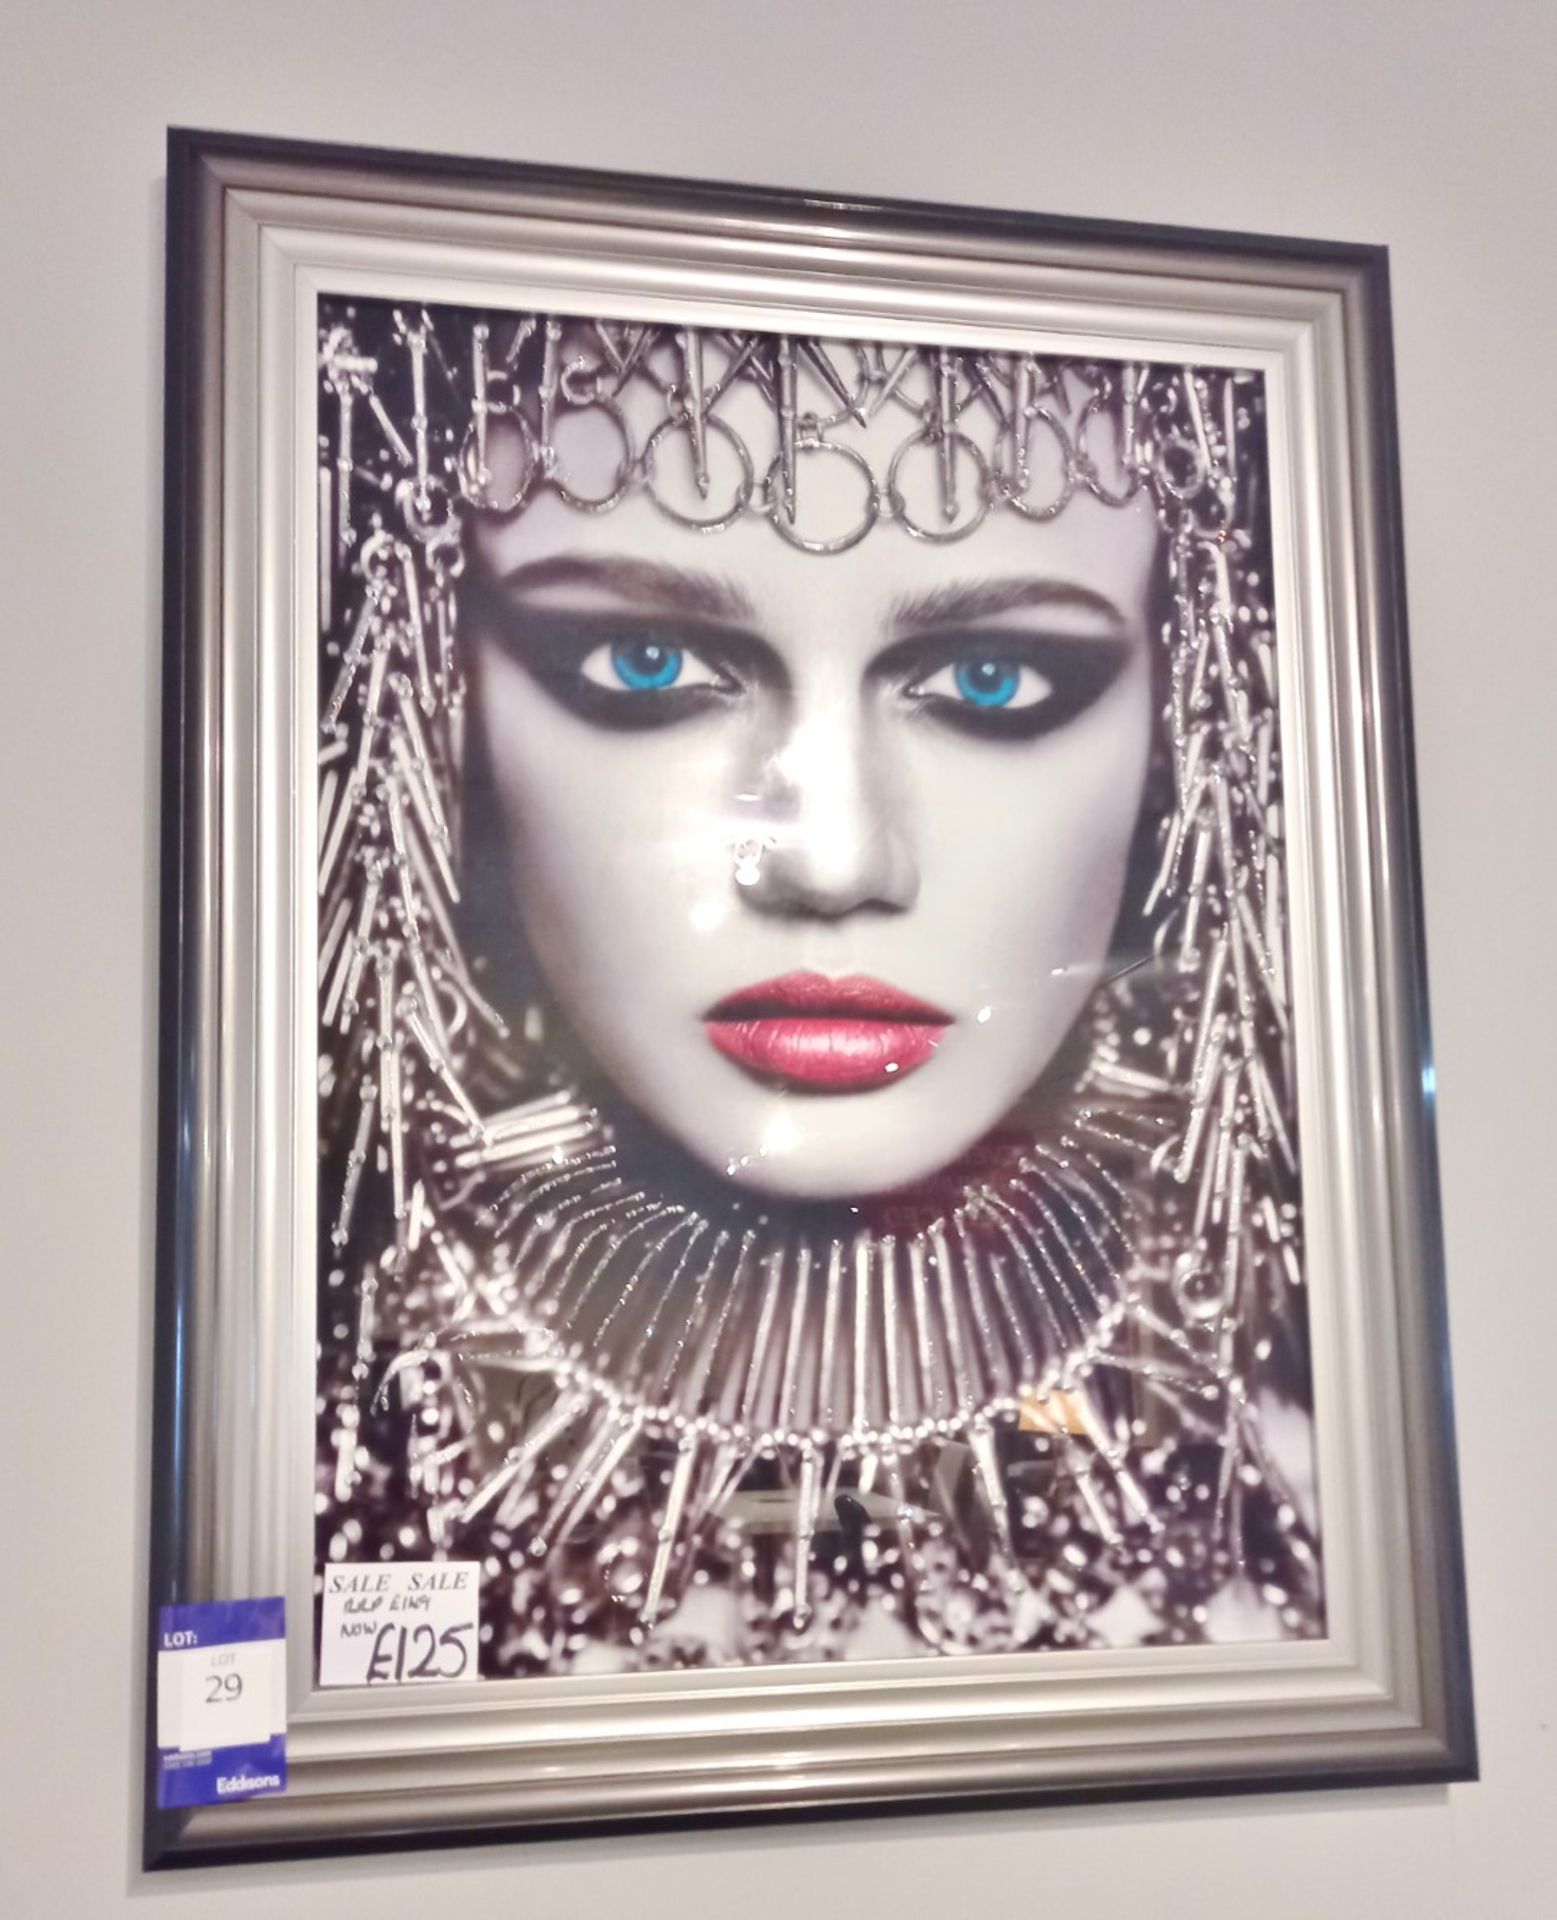 Wall Mounted Picture of Blue Eyed Women (950 x 750mm) Rrp. £129 - Image 3 of 3